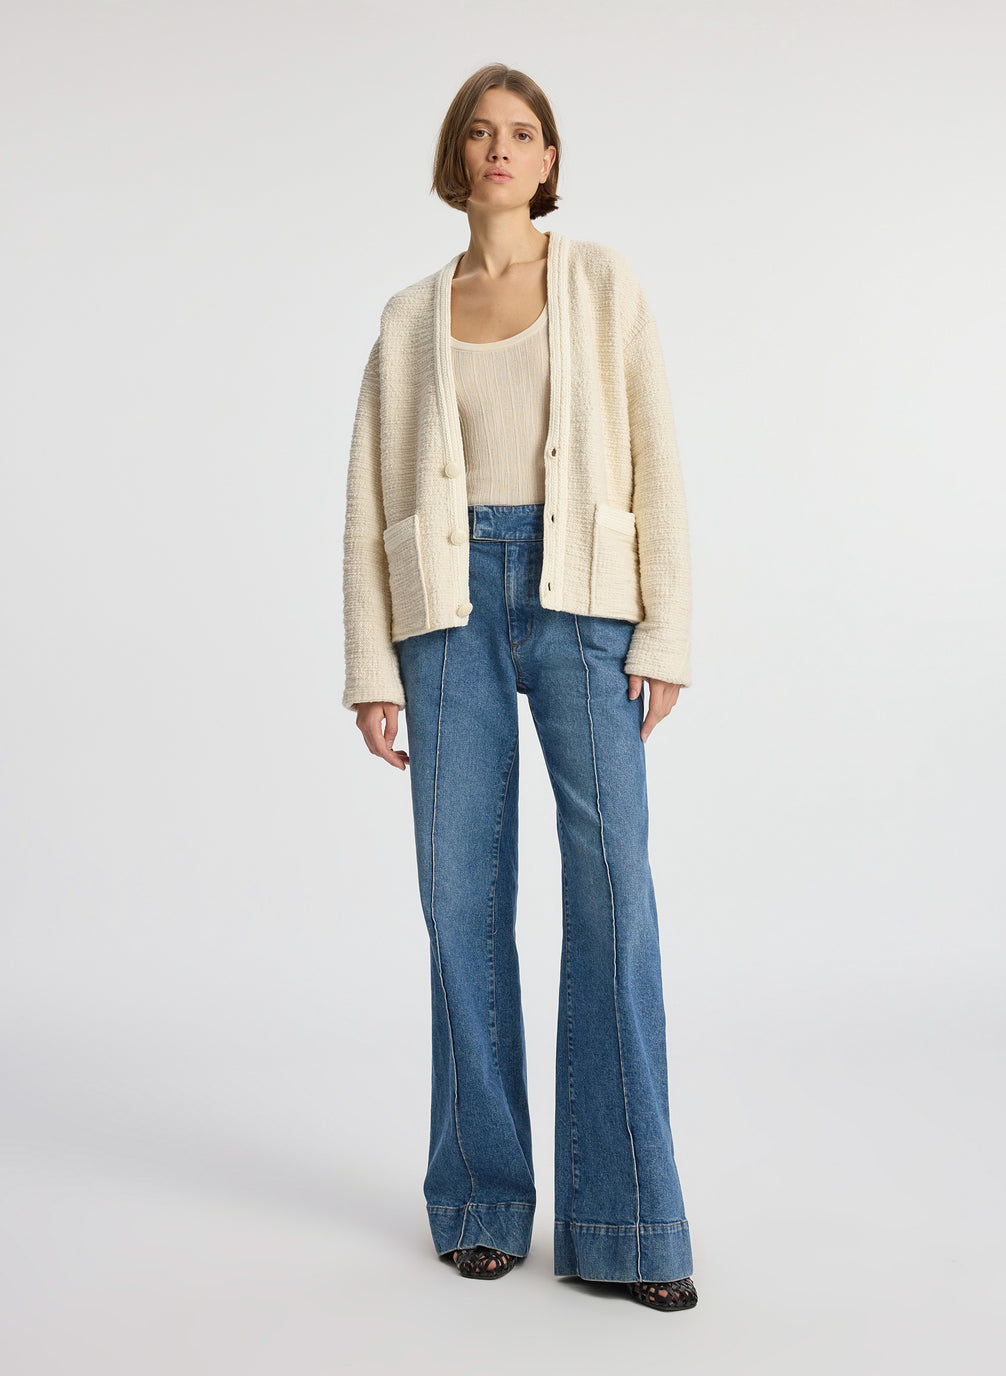 front view of woman wearing cream boucle jacket, cream tank top and medium blue denim jeans